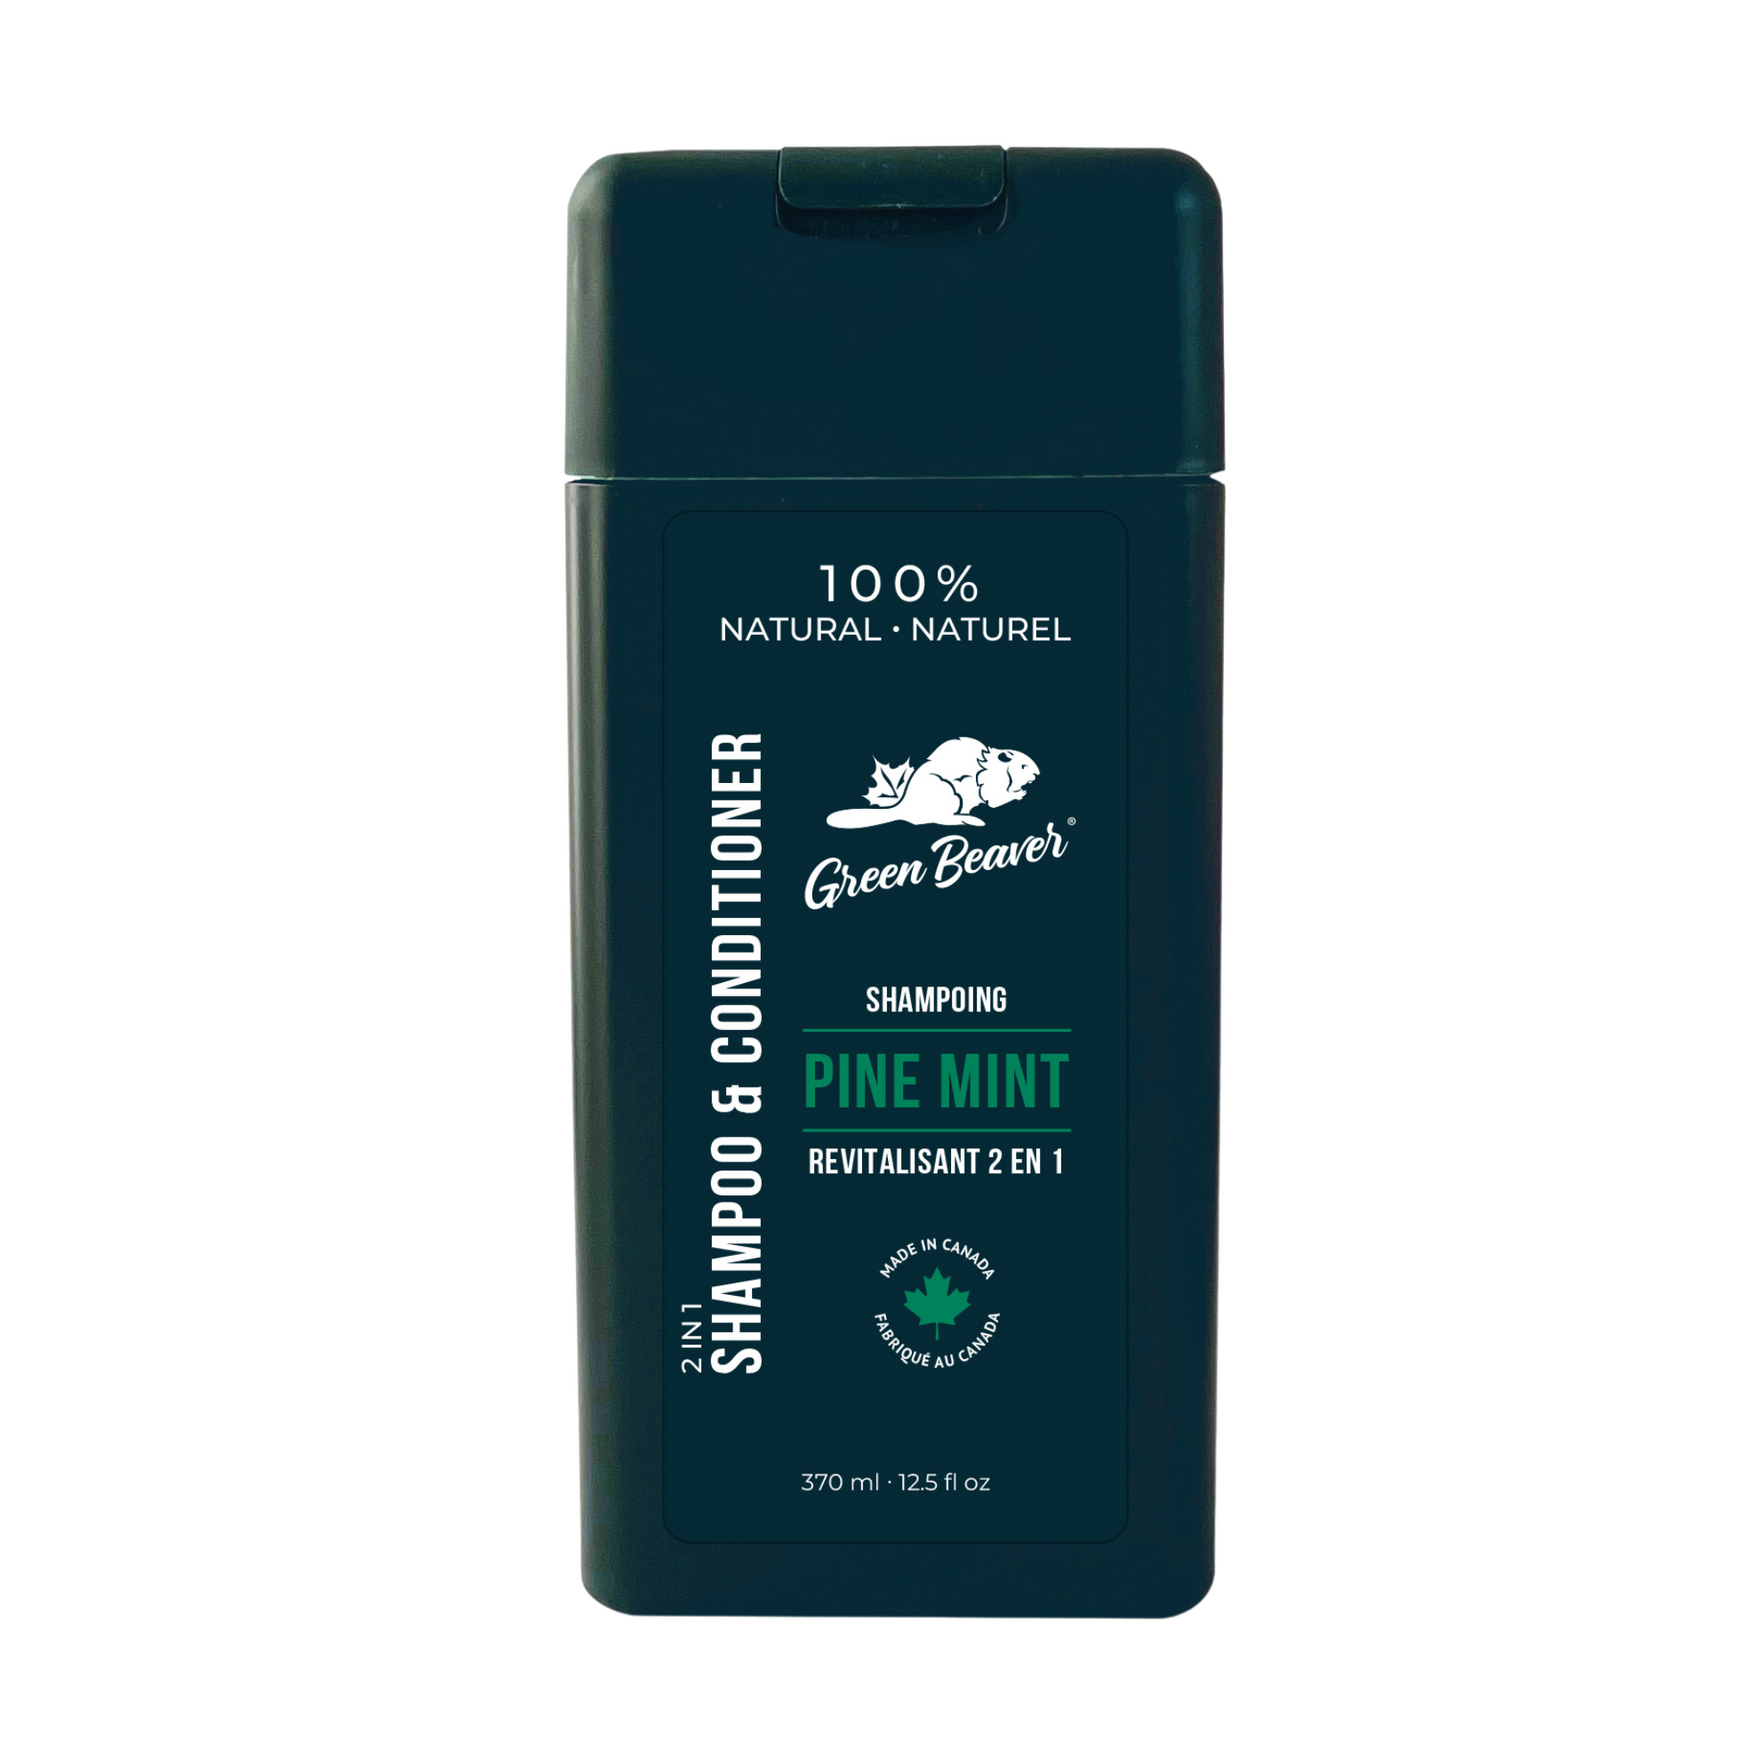 green beaver company - pine mint shampoo & conditioner - all things being eco chilliwack - all natural - cruelty free - canadian product